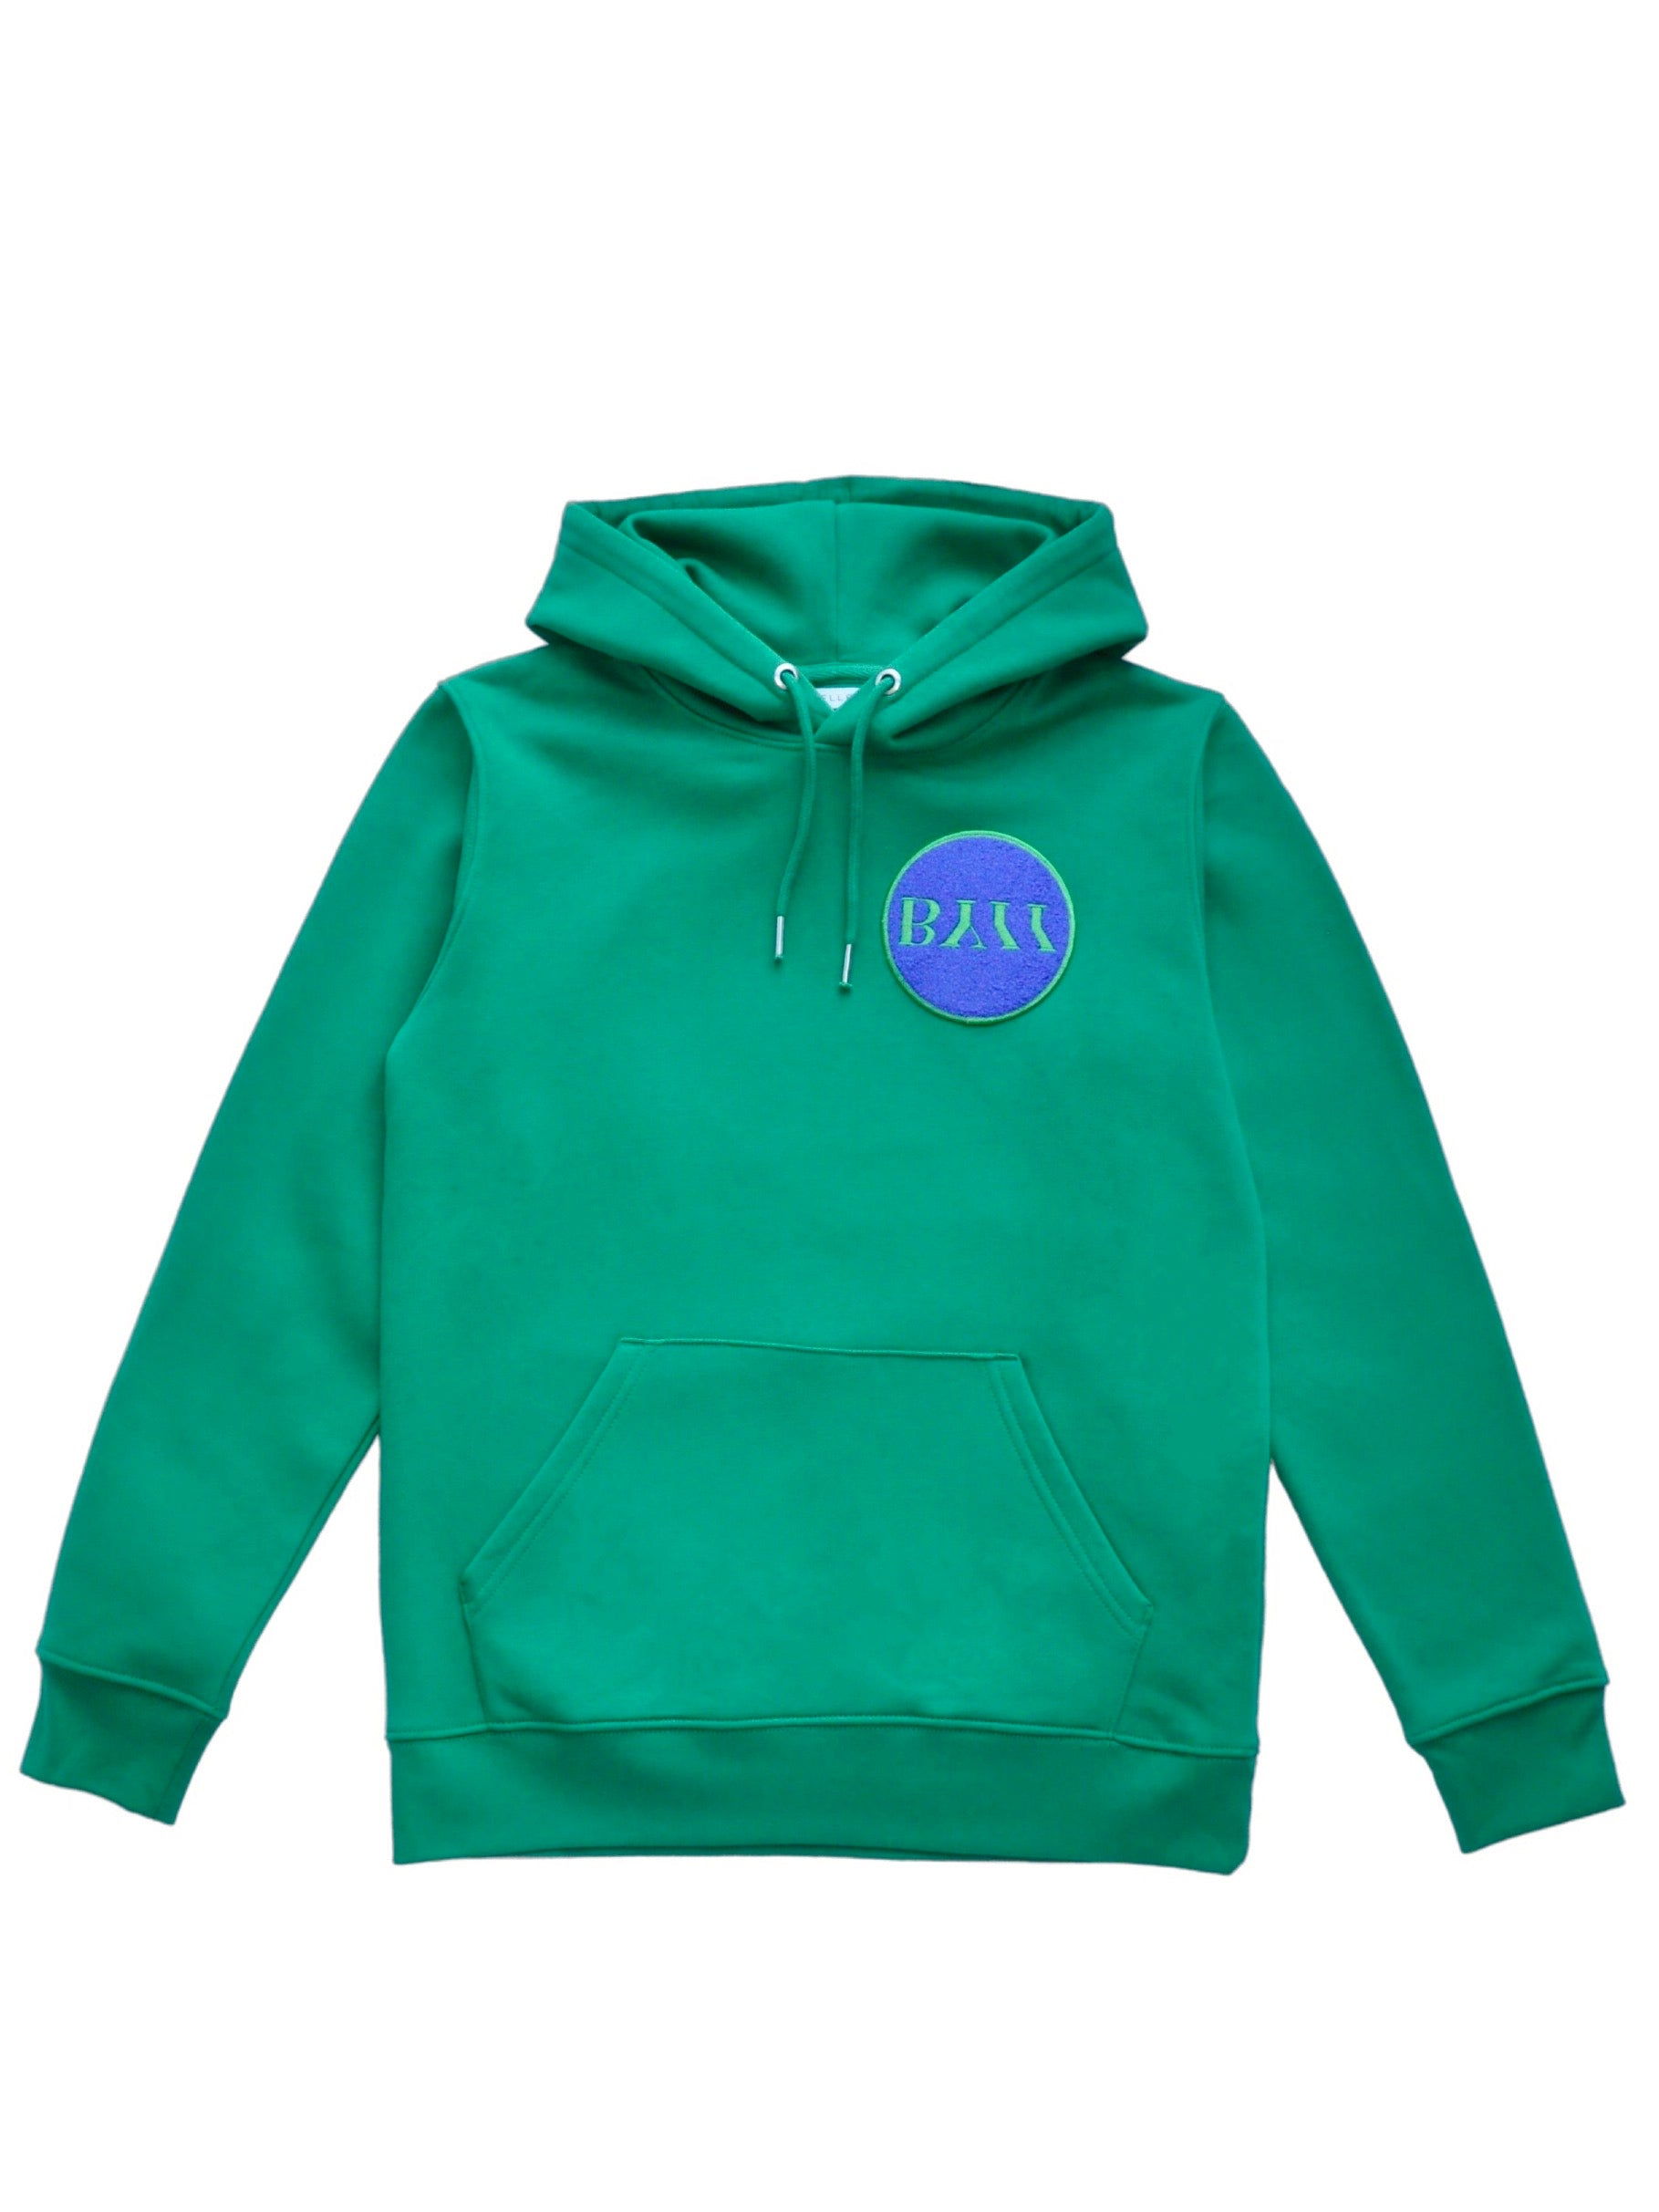 BY11 Organic Cotton Logo Patch Hoodie - Kelly Green & Royal Blue